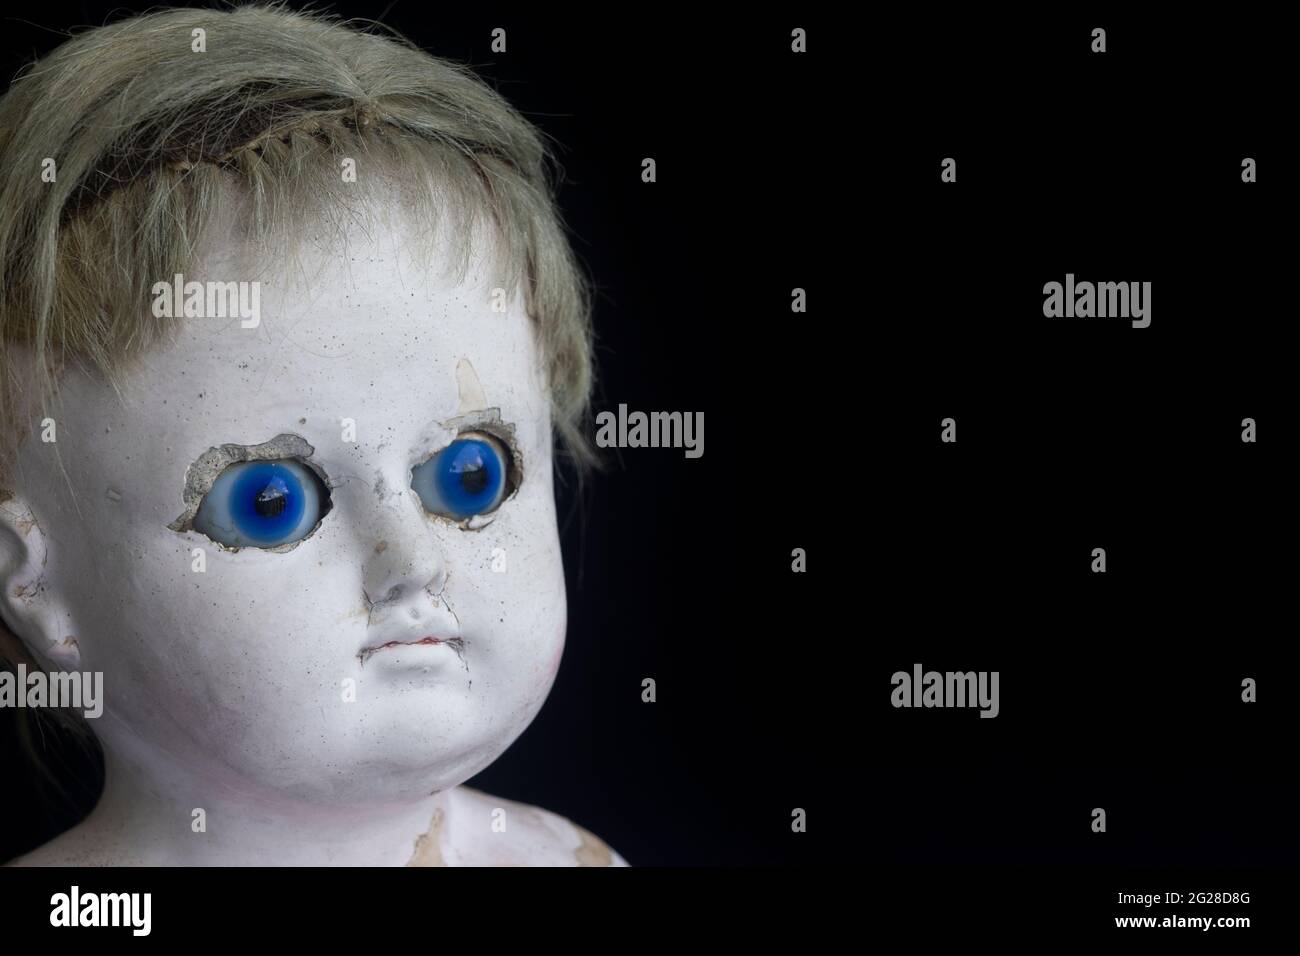 Creepy scary old vintage zombie doll face with staring hypnotic blue eyes on black background with copy space. Stock Photo